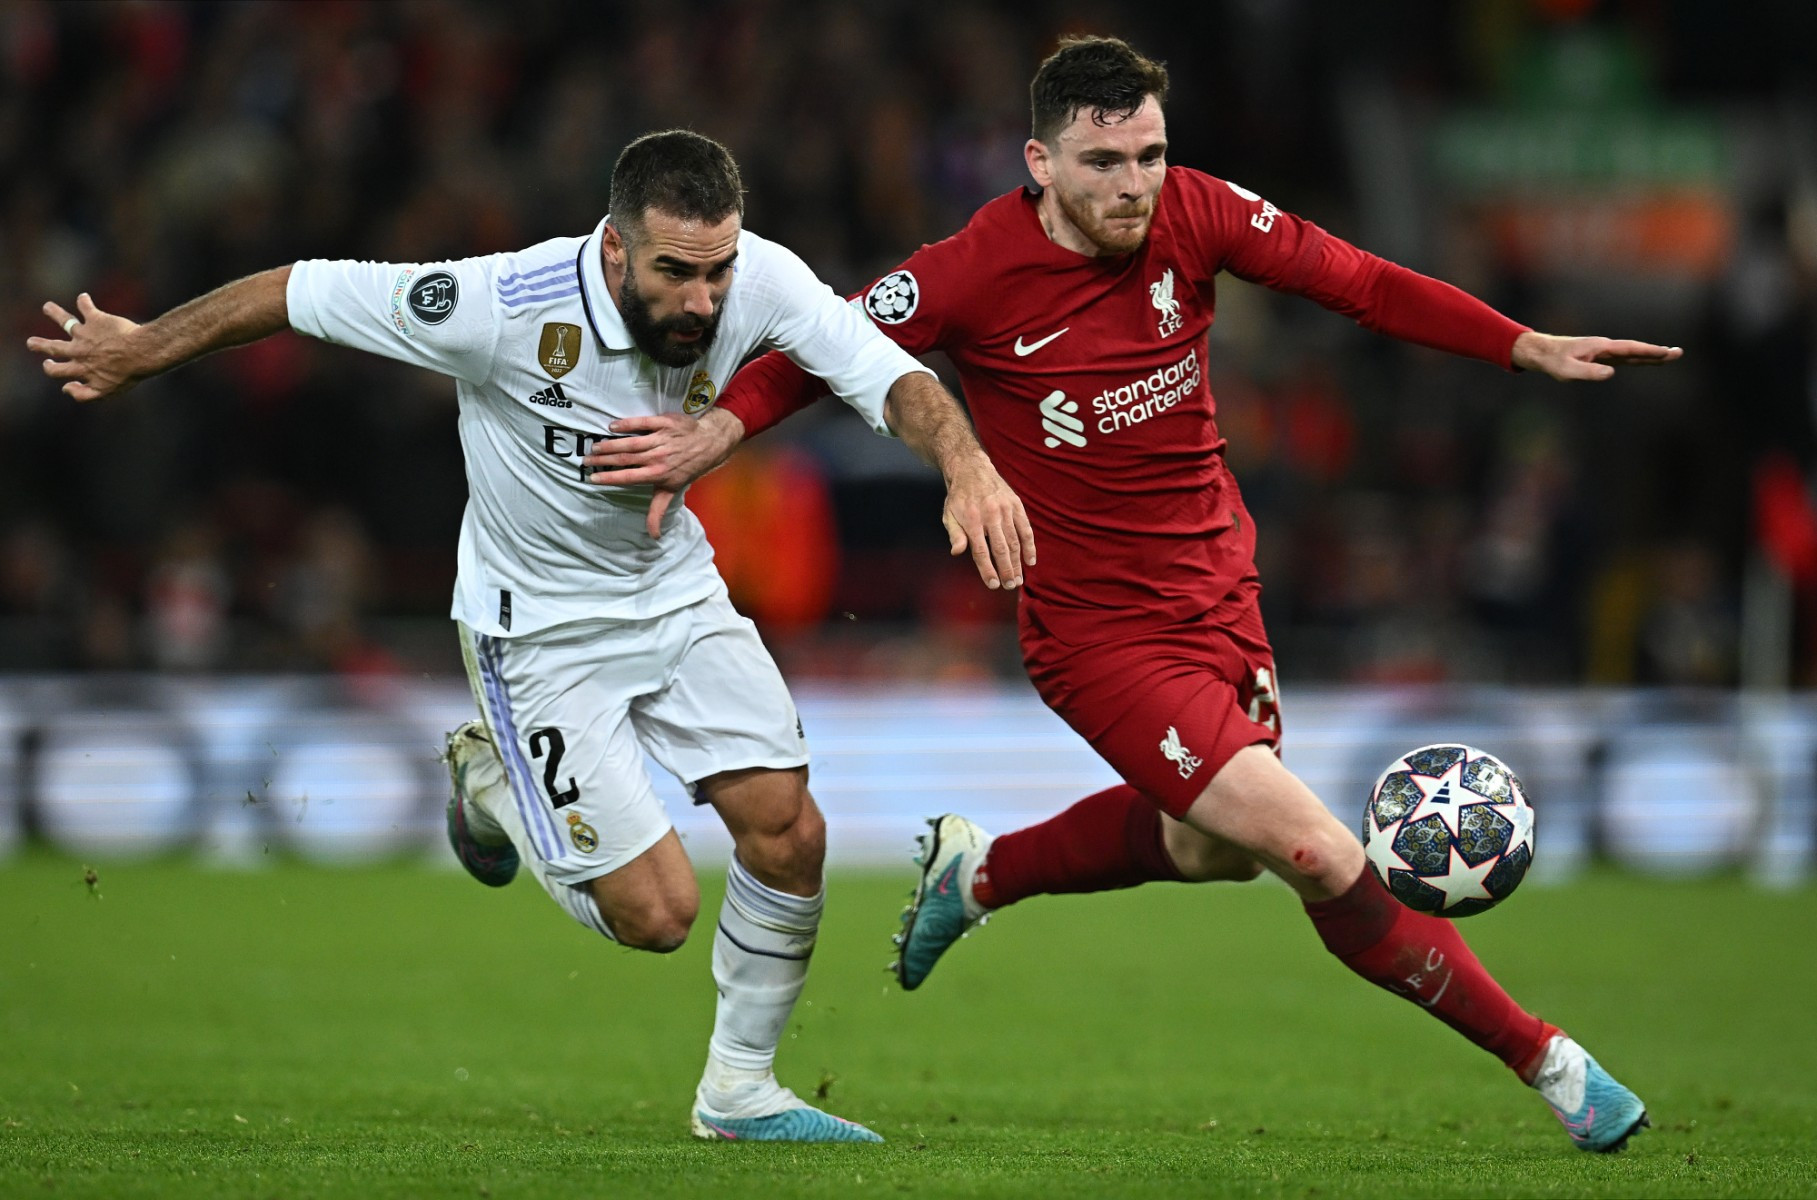 Liverpool may have ‘one percent chance’ against Madrid